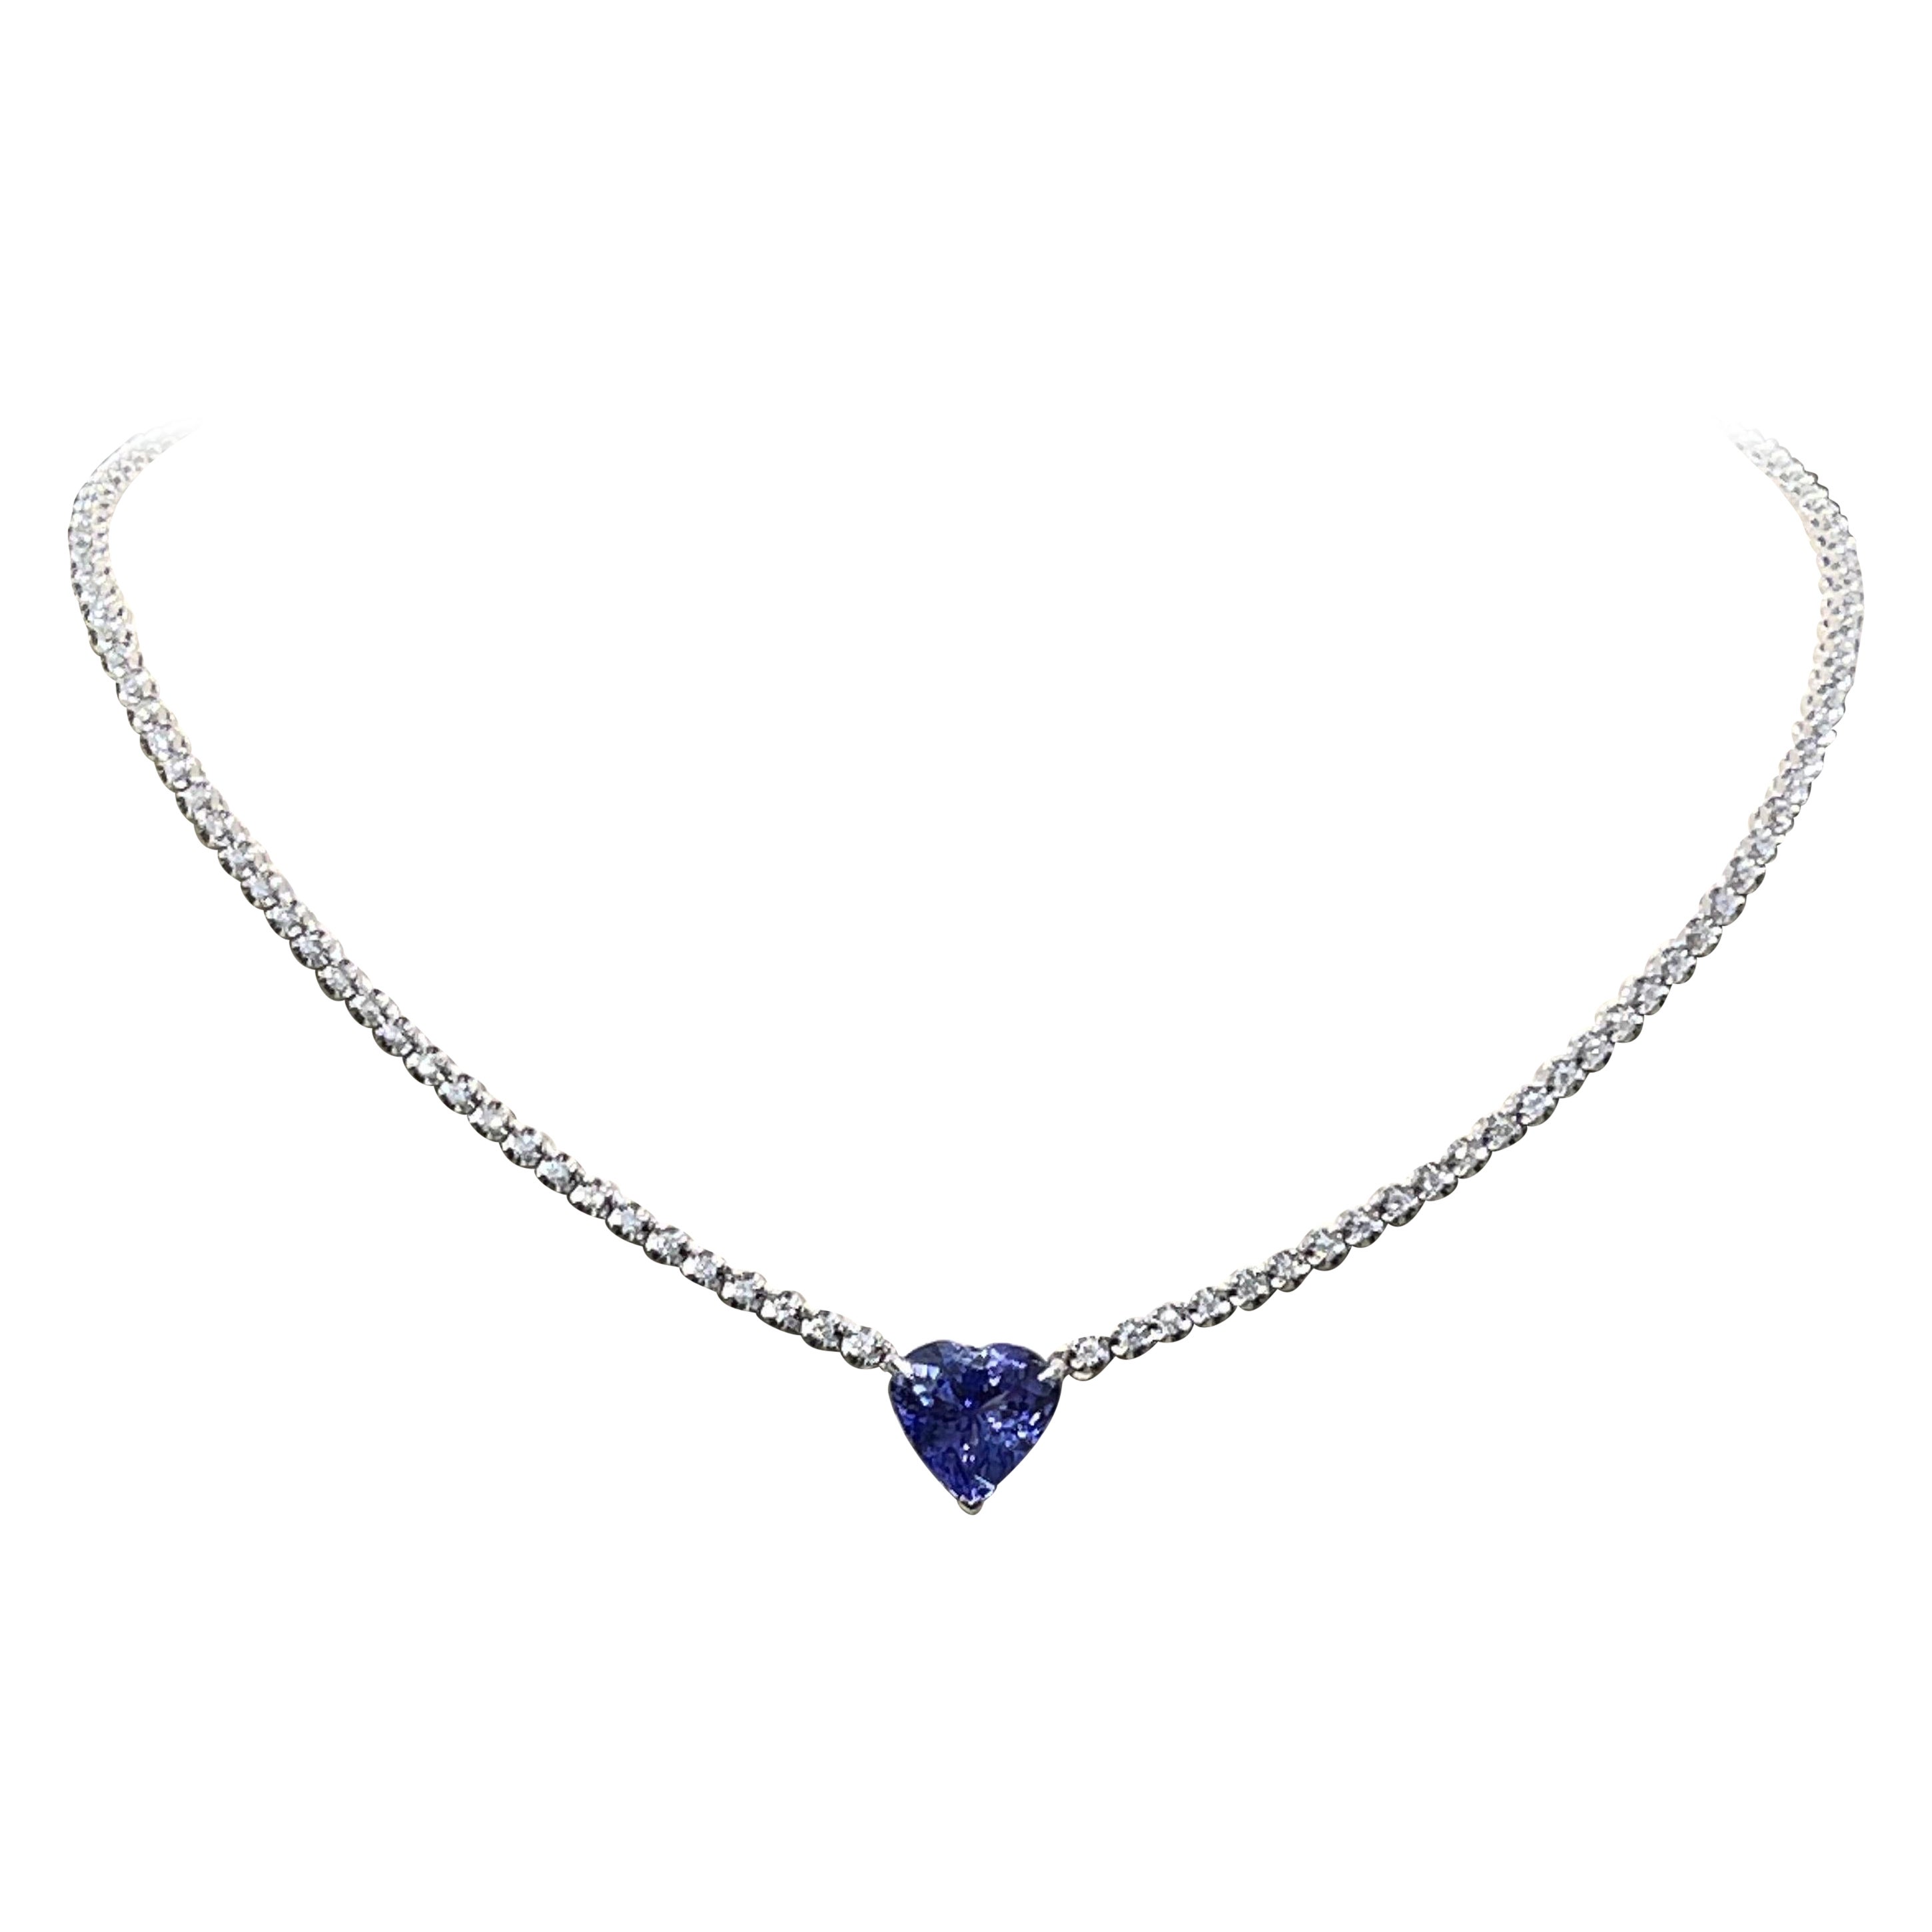 Stunning Tanzanite And Diamond Necklace In 18k White Gold 